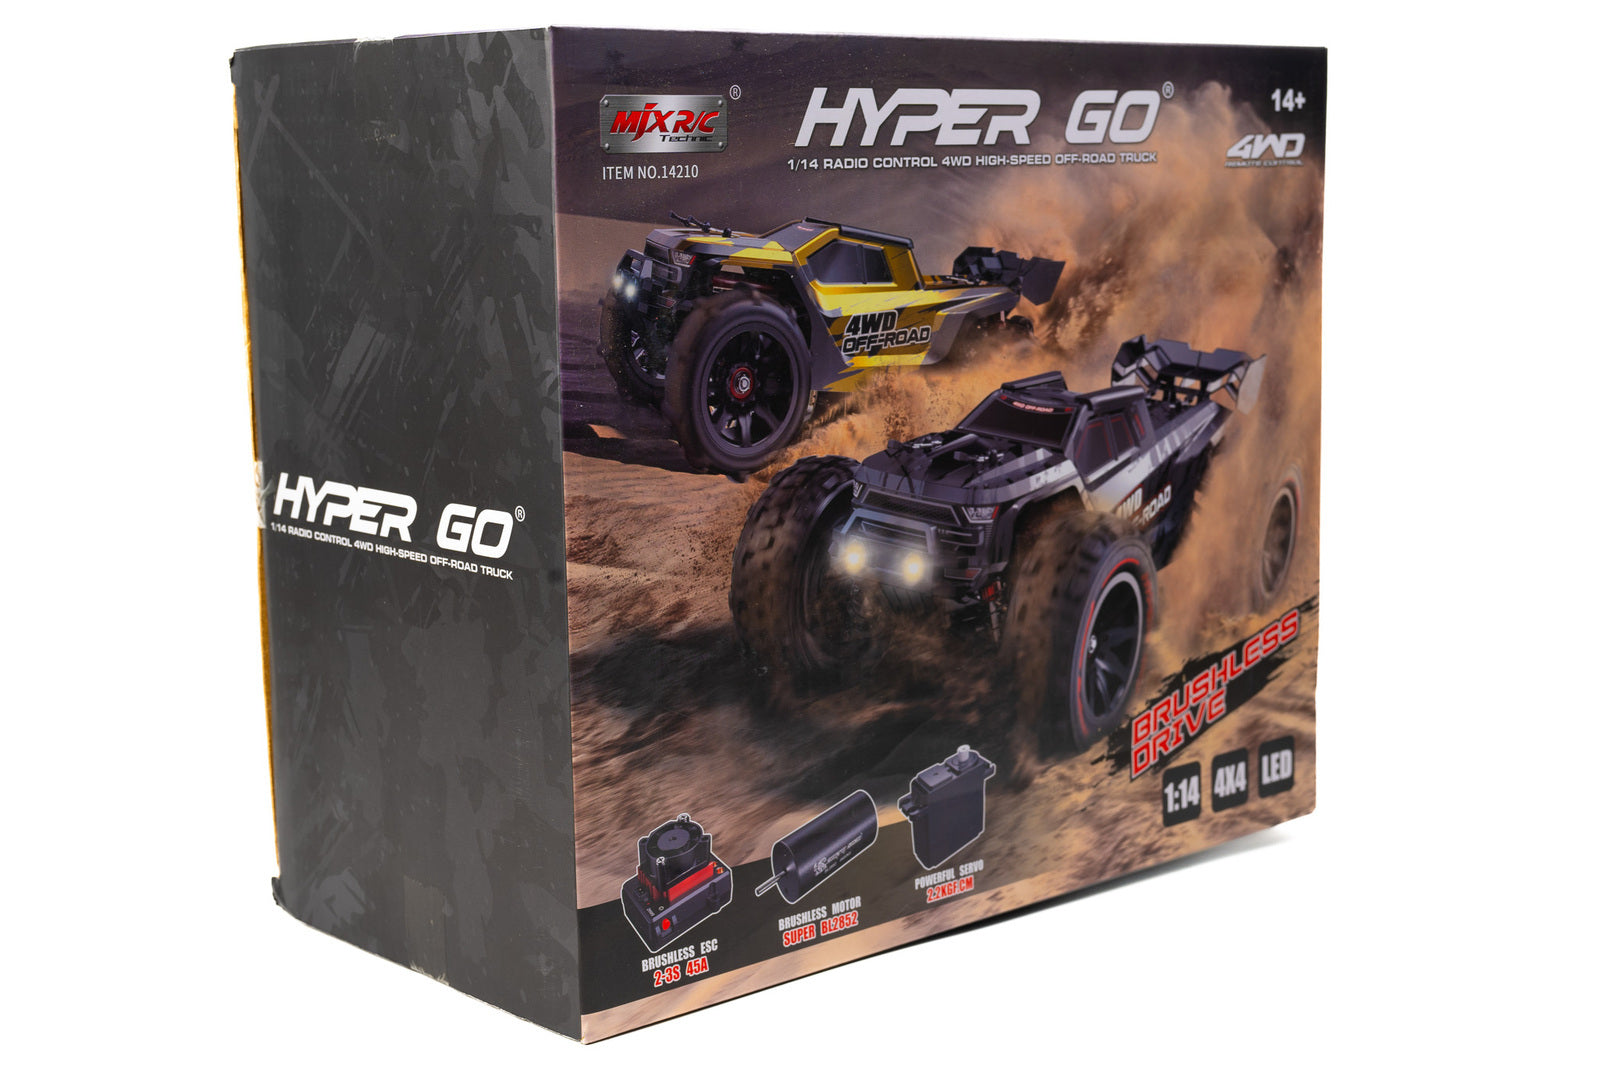 MJX 1/14 Hyper Go 4WD High-speed Off-road Brushless RC Truggy MJX-1421 –  Radical RC Hobbies